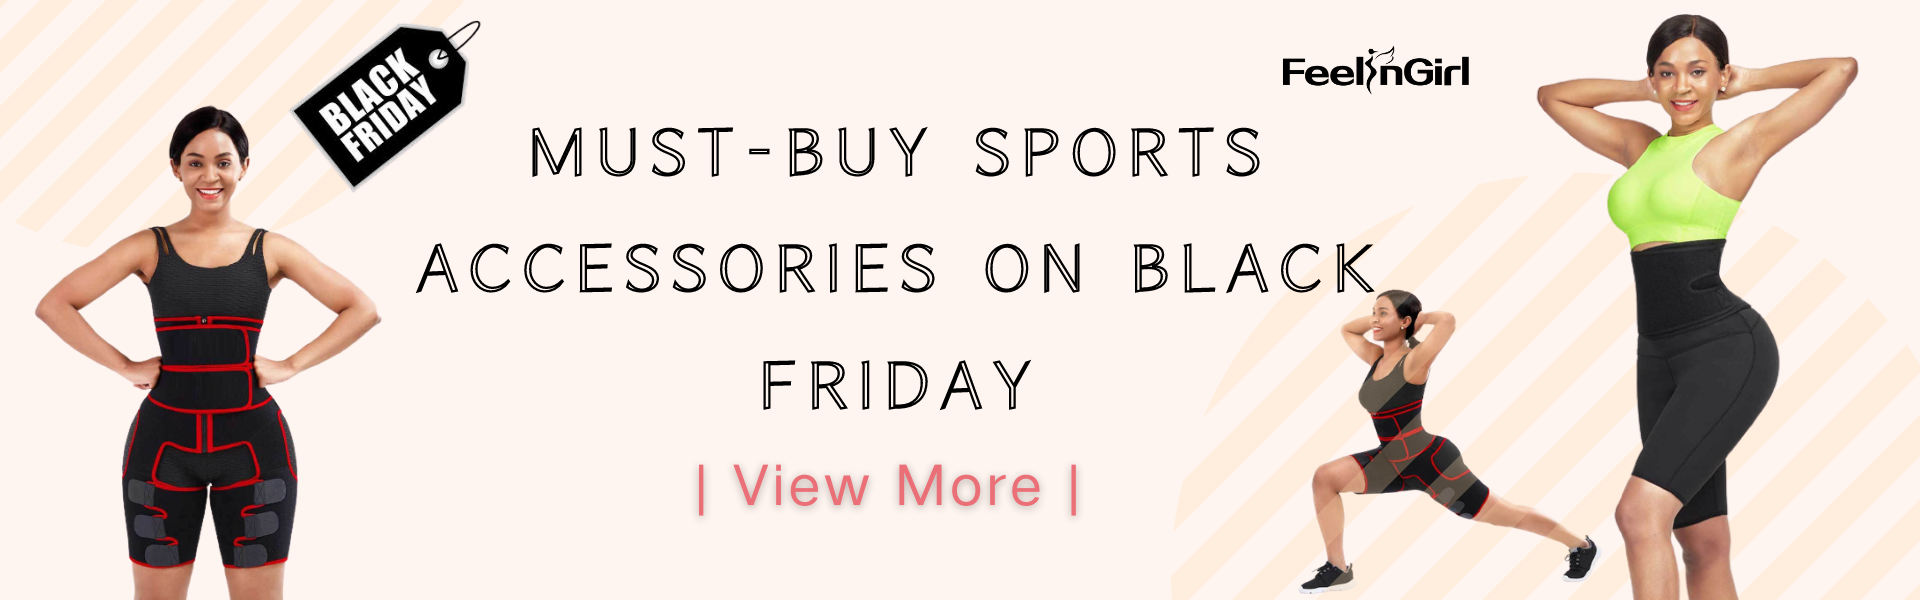 Must-buy Sports Accessories on Black Friday